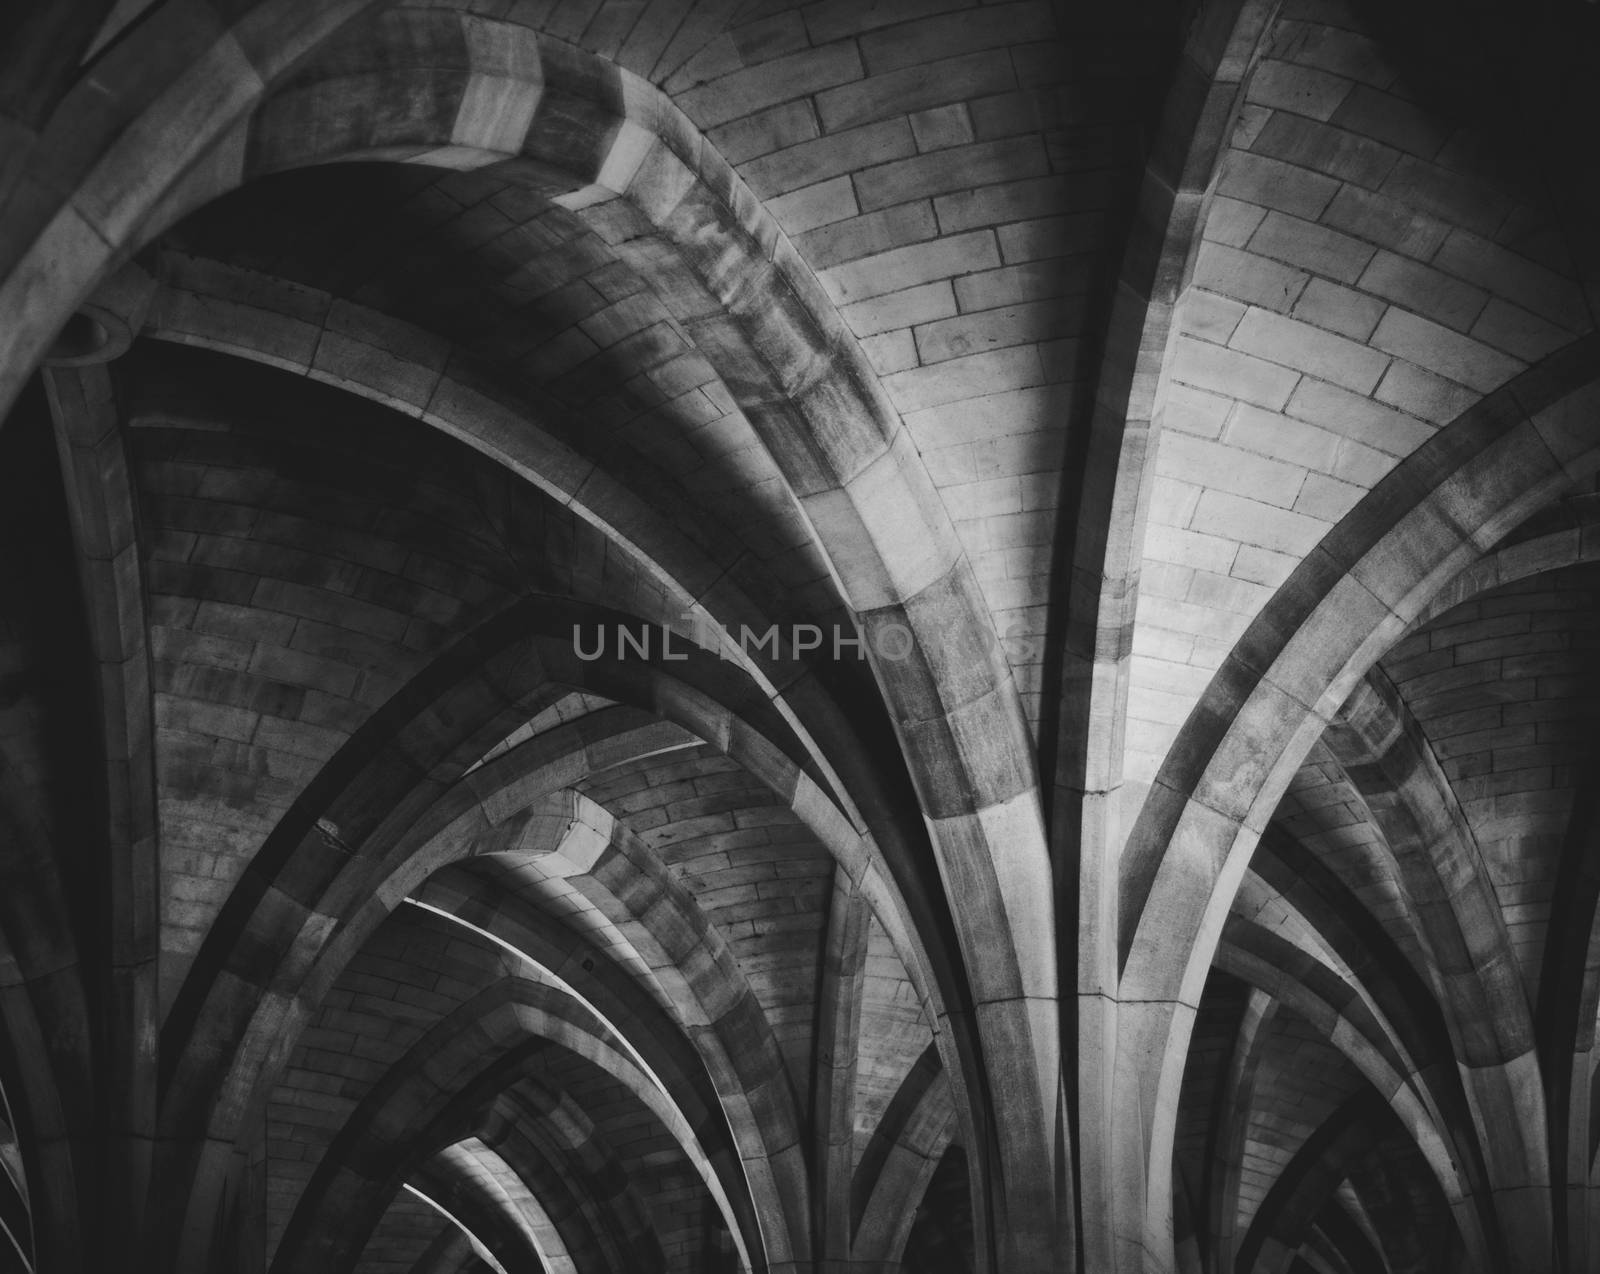 University Cloister Arches by mrdoomits